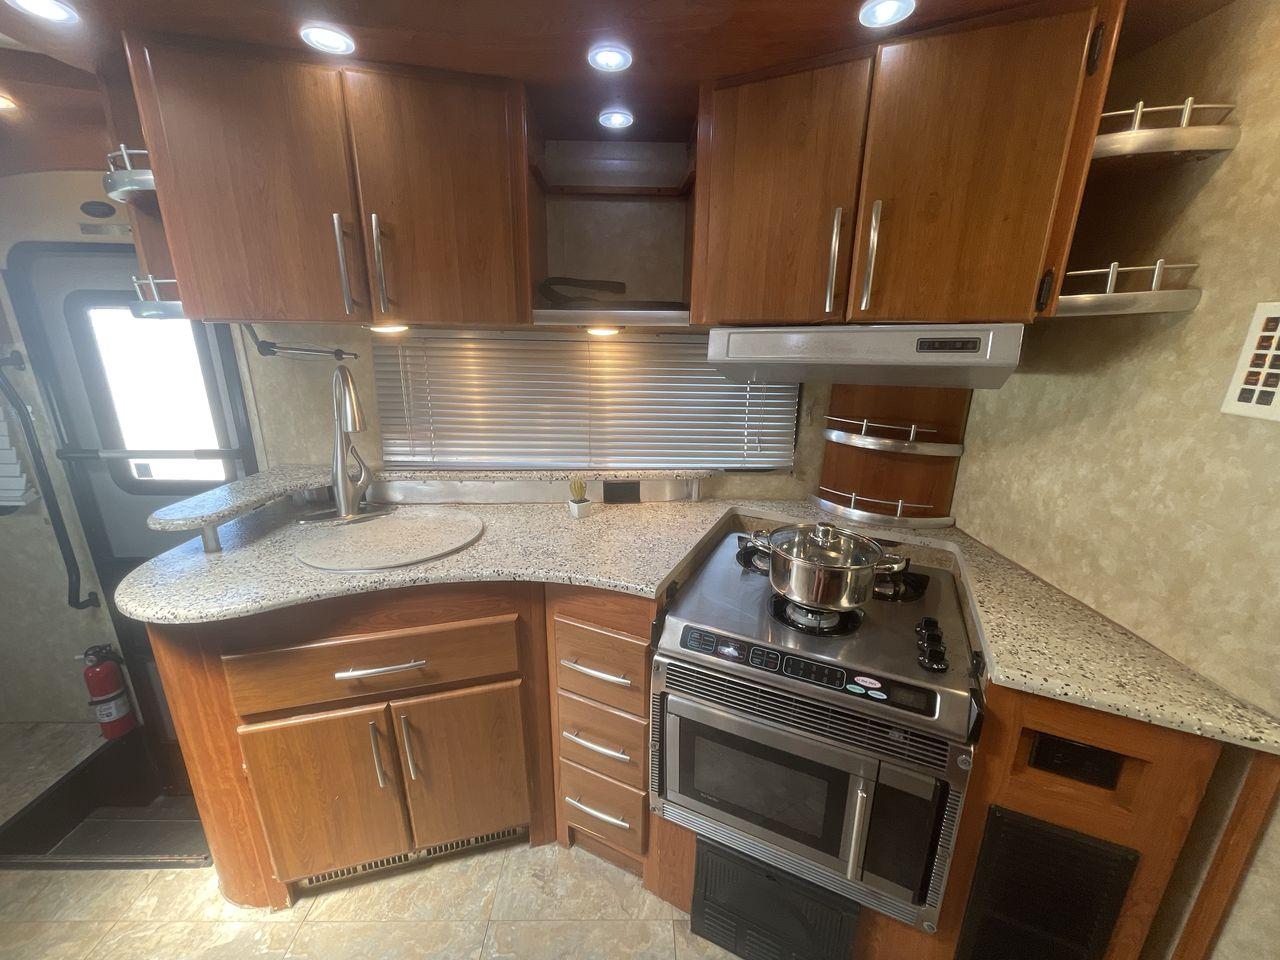 2008 TAN COACHMEN LEPRECHAUN 320DS E-450 (1FDXE45S08D) with an 6.8L V10 SOHC 20V engine, Length: 31.5 ft. | Dry Weight: 12,555 lbs. | Gross Weight: 14,500 lbs. | Slides: 2 transmission, located at 4319 N Main St, Cleburne, TX, 76033, (817) 678-5133, 32.385960, -97.391212 - Here are some unique features and characteristics of the 2008 Coachmen Leprechaun 320DS that will make you want to buy this motorhome. (1) The 2008 Coachmen Leprechaun 320DS has two slide-outs, which expand the living space to create more room for relaxation and entertainment. With these additional - Photo #9